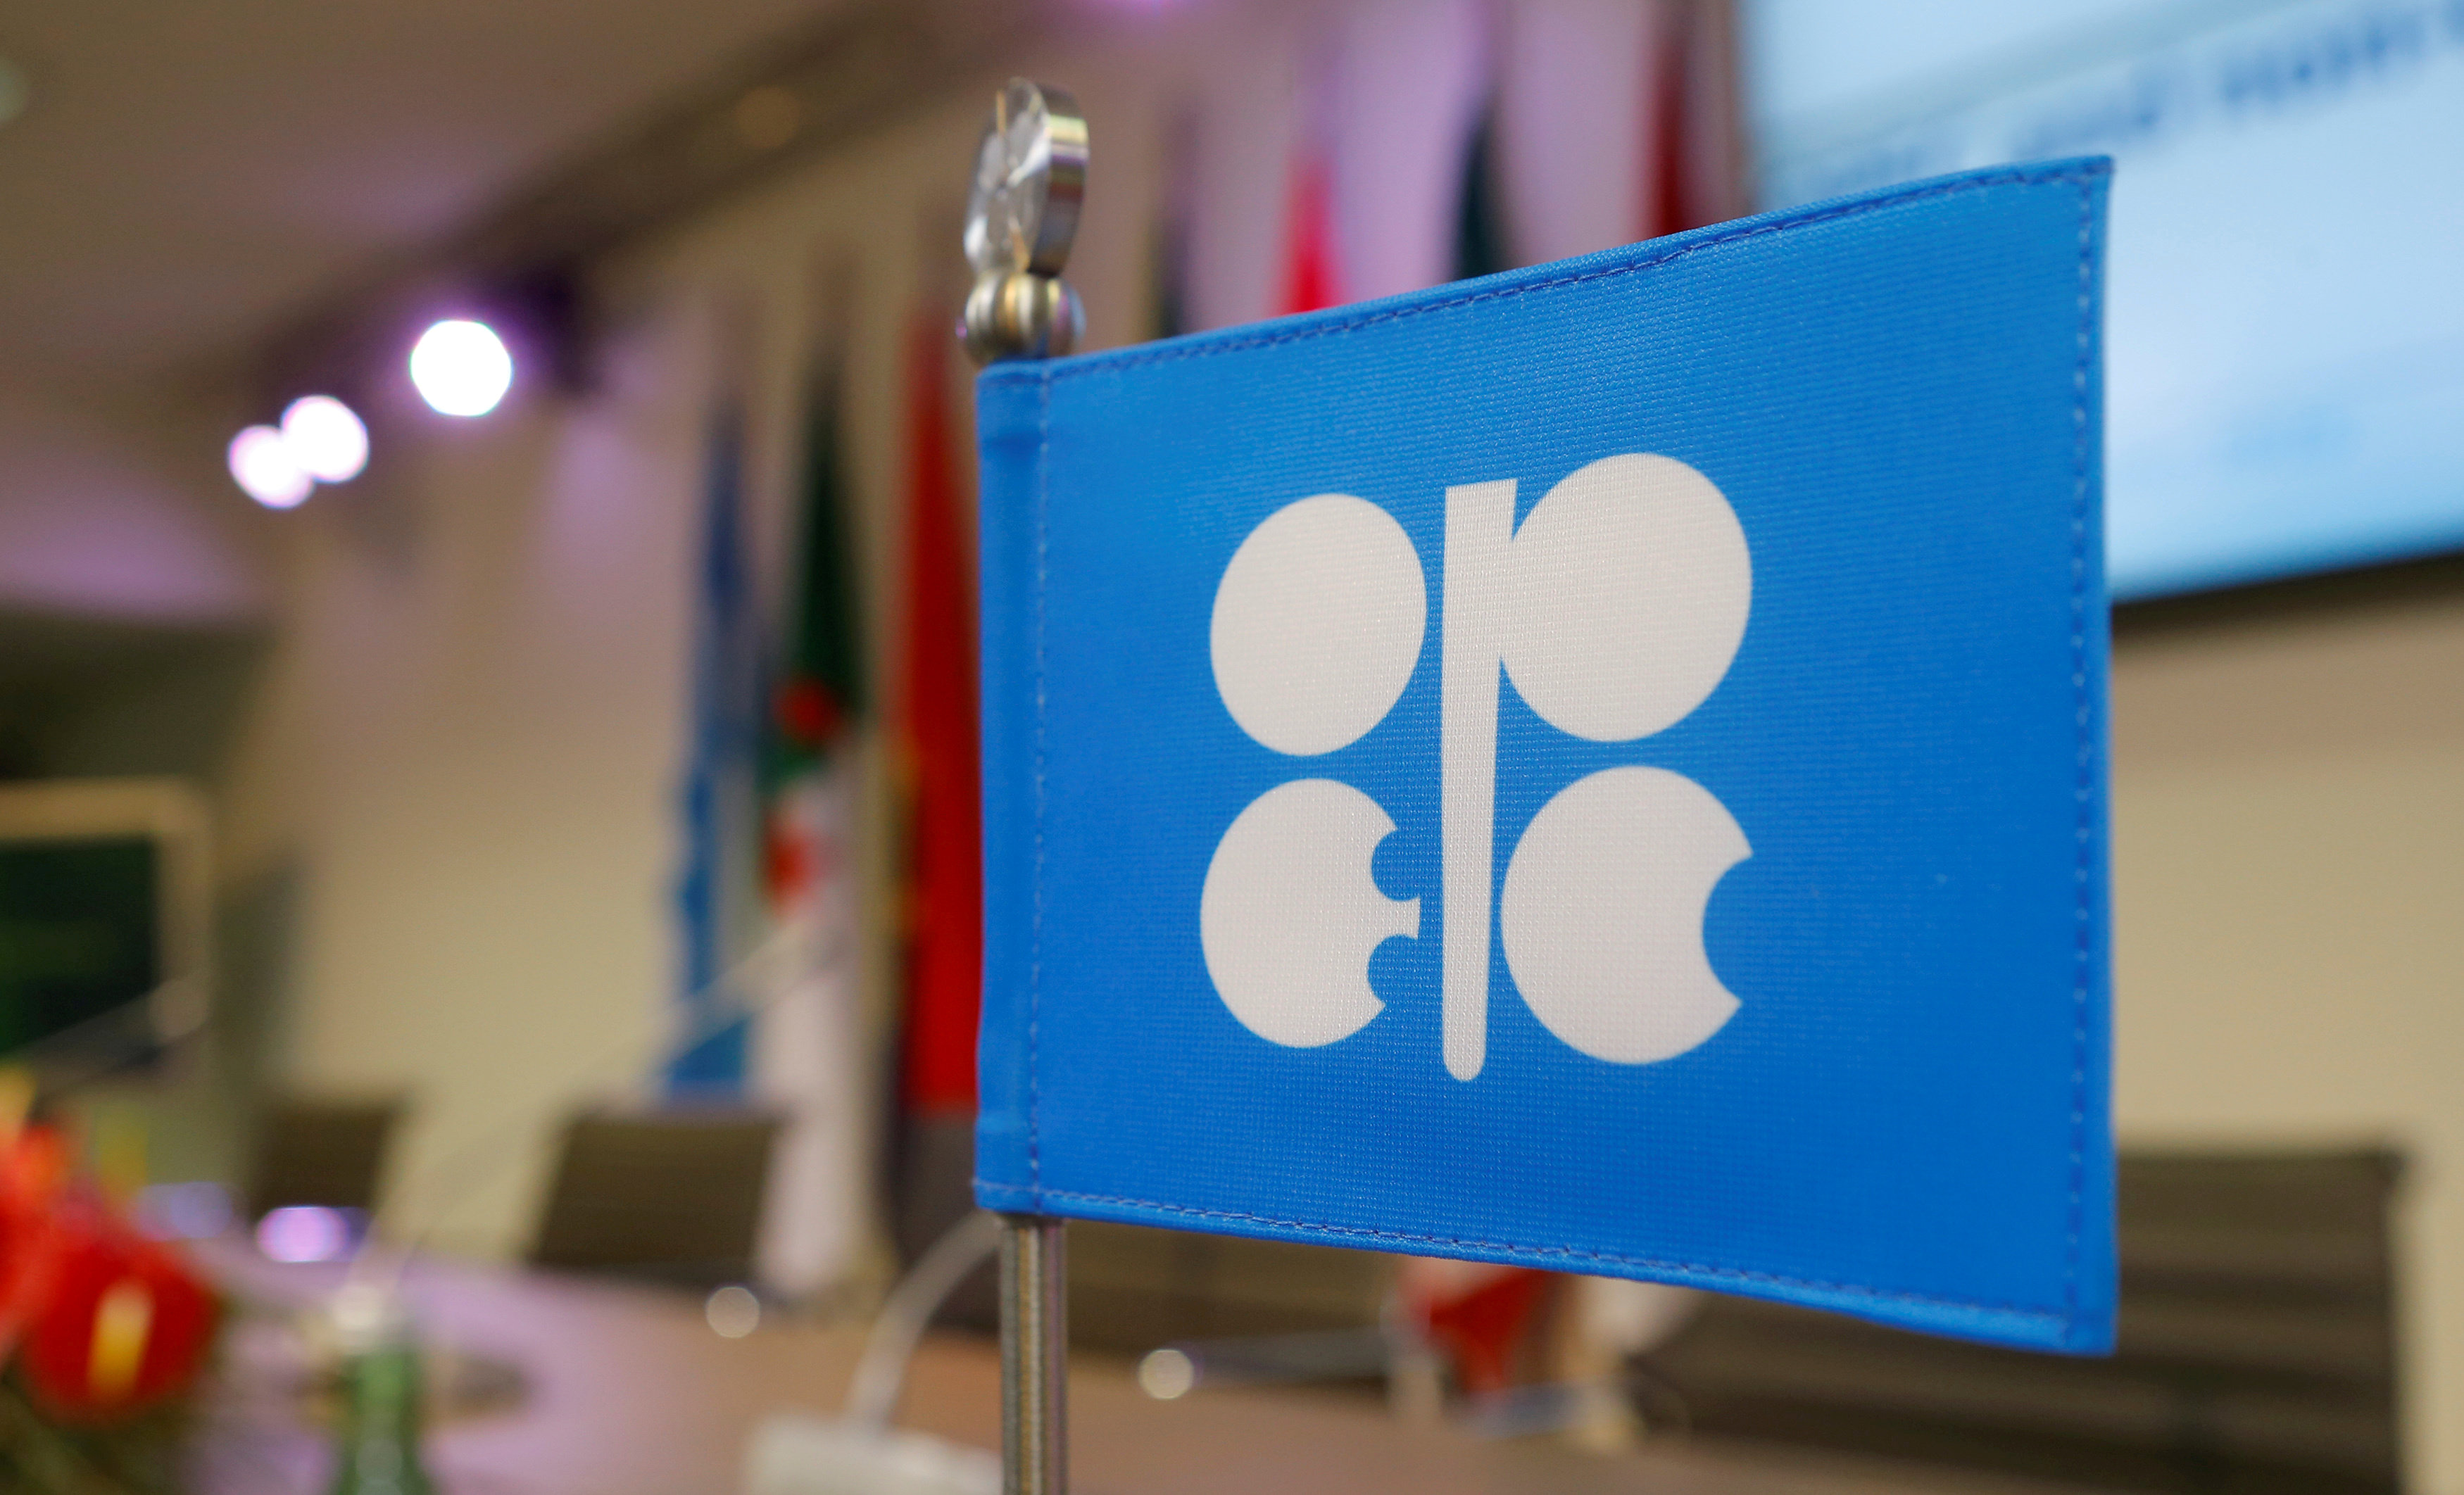 Opec looking at deepening, extending oil supply cut